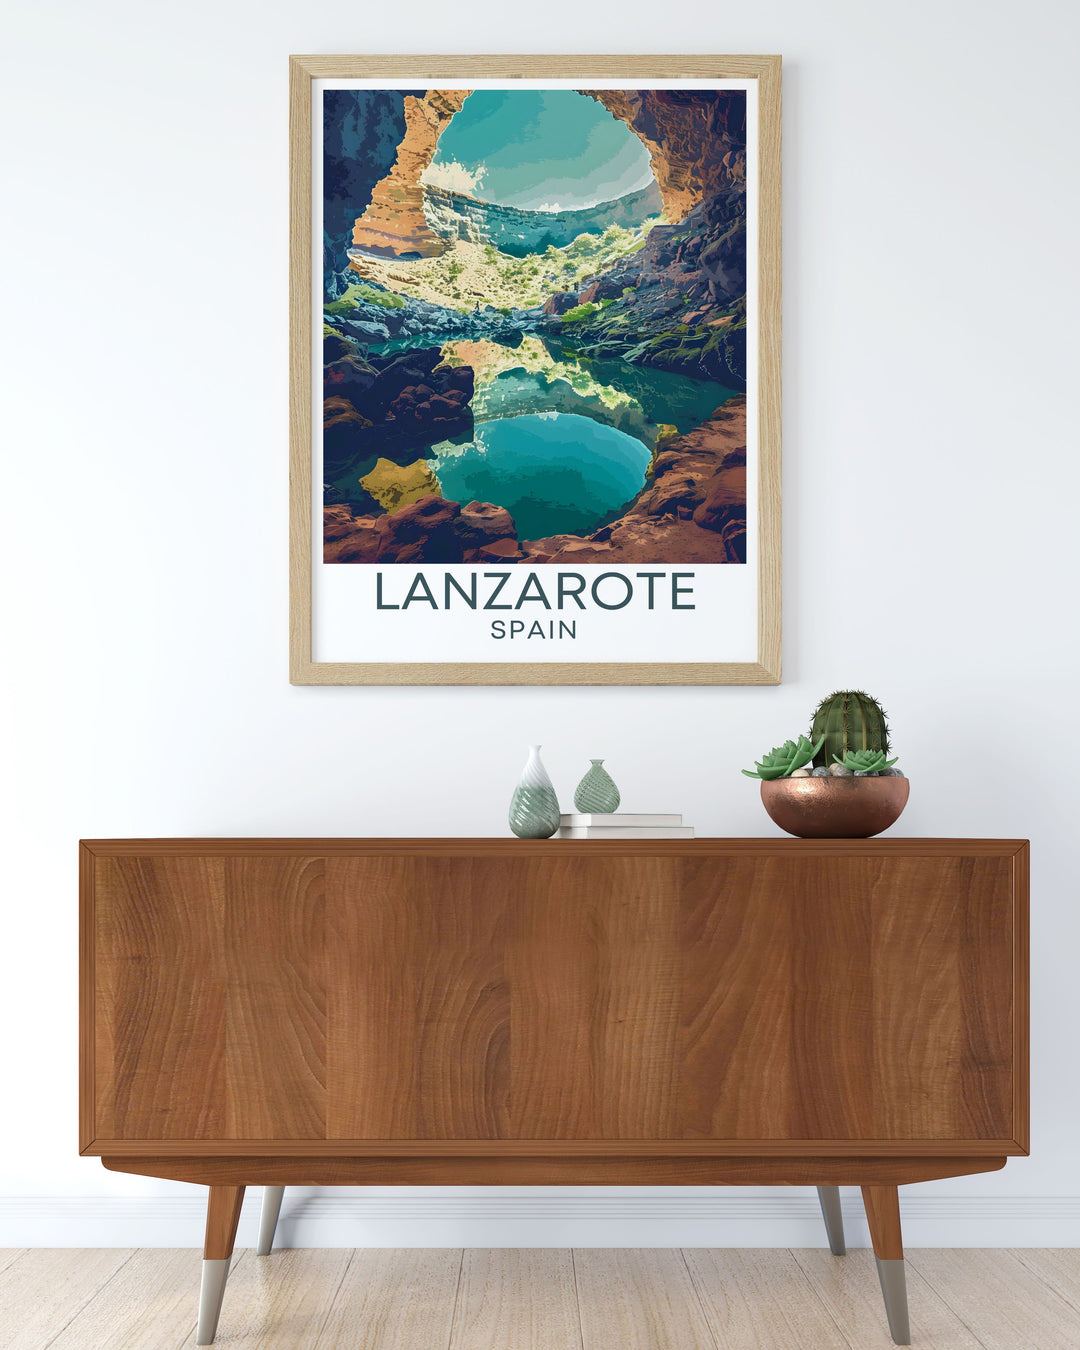 Highlighting the architectural marvels of Jameos del Agua, this travel poster captures the seamless blend of lush gardens, artistic structures, and volcanic landscapes, offering a unique glimpse into Cesar Manriques masterpiece, perfect for your wall decor.